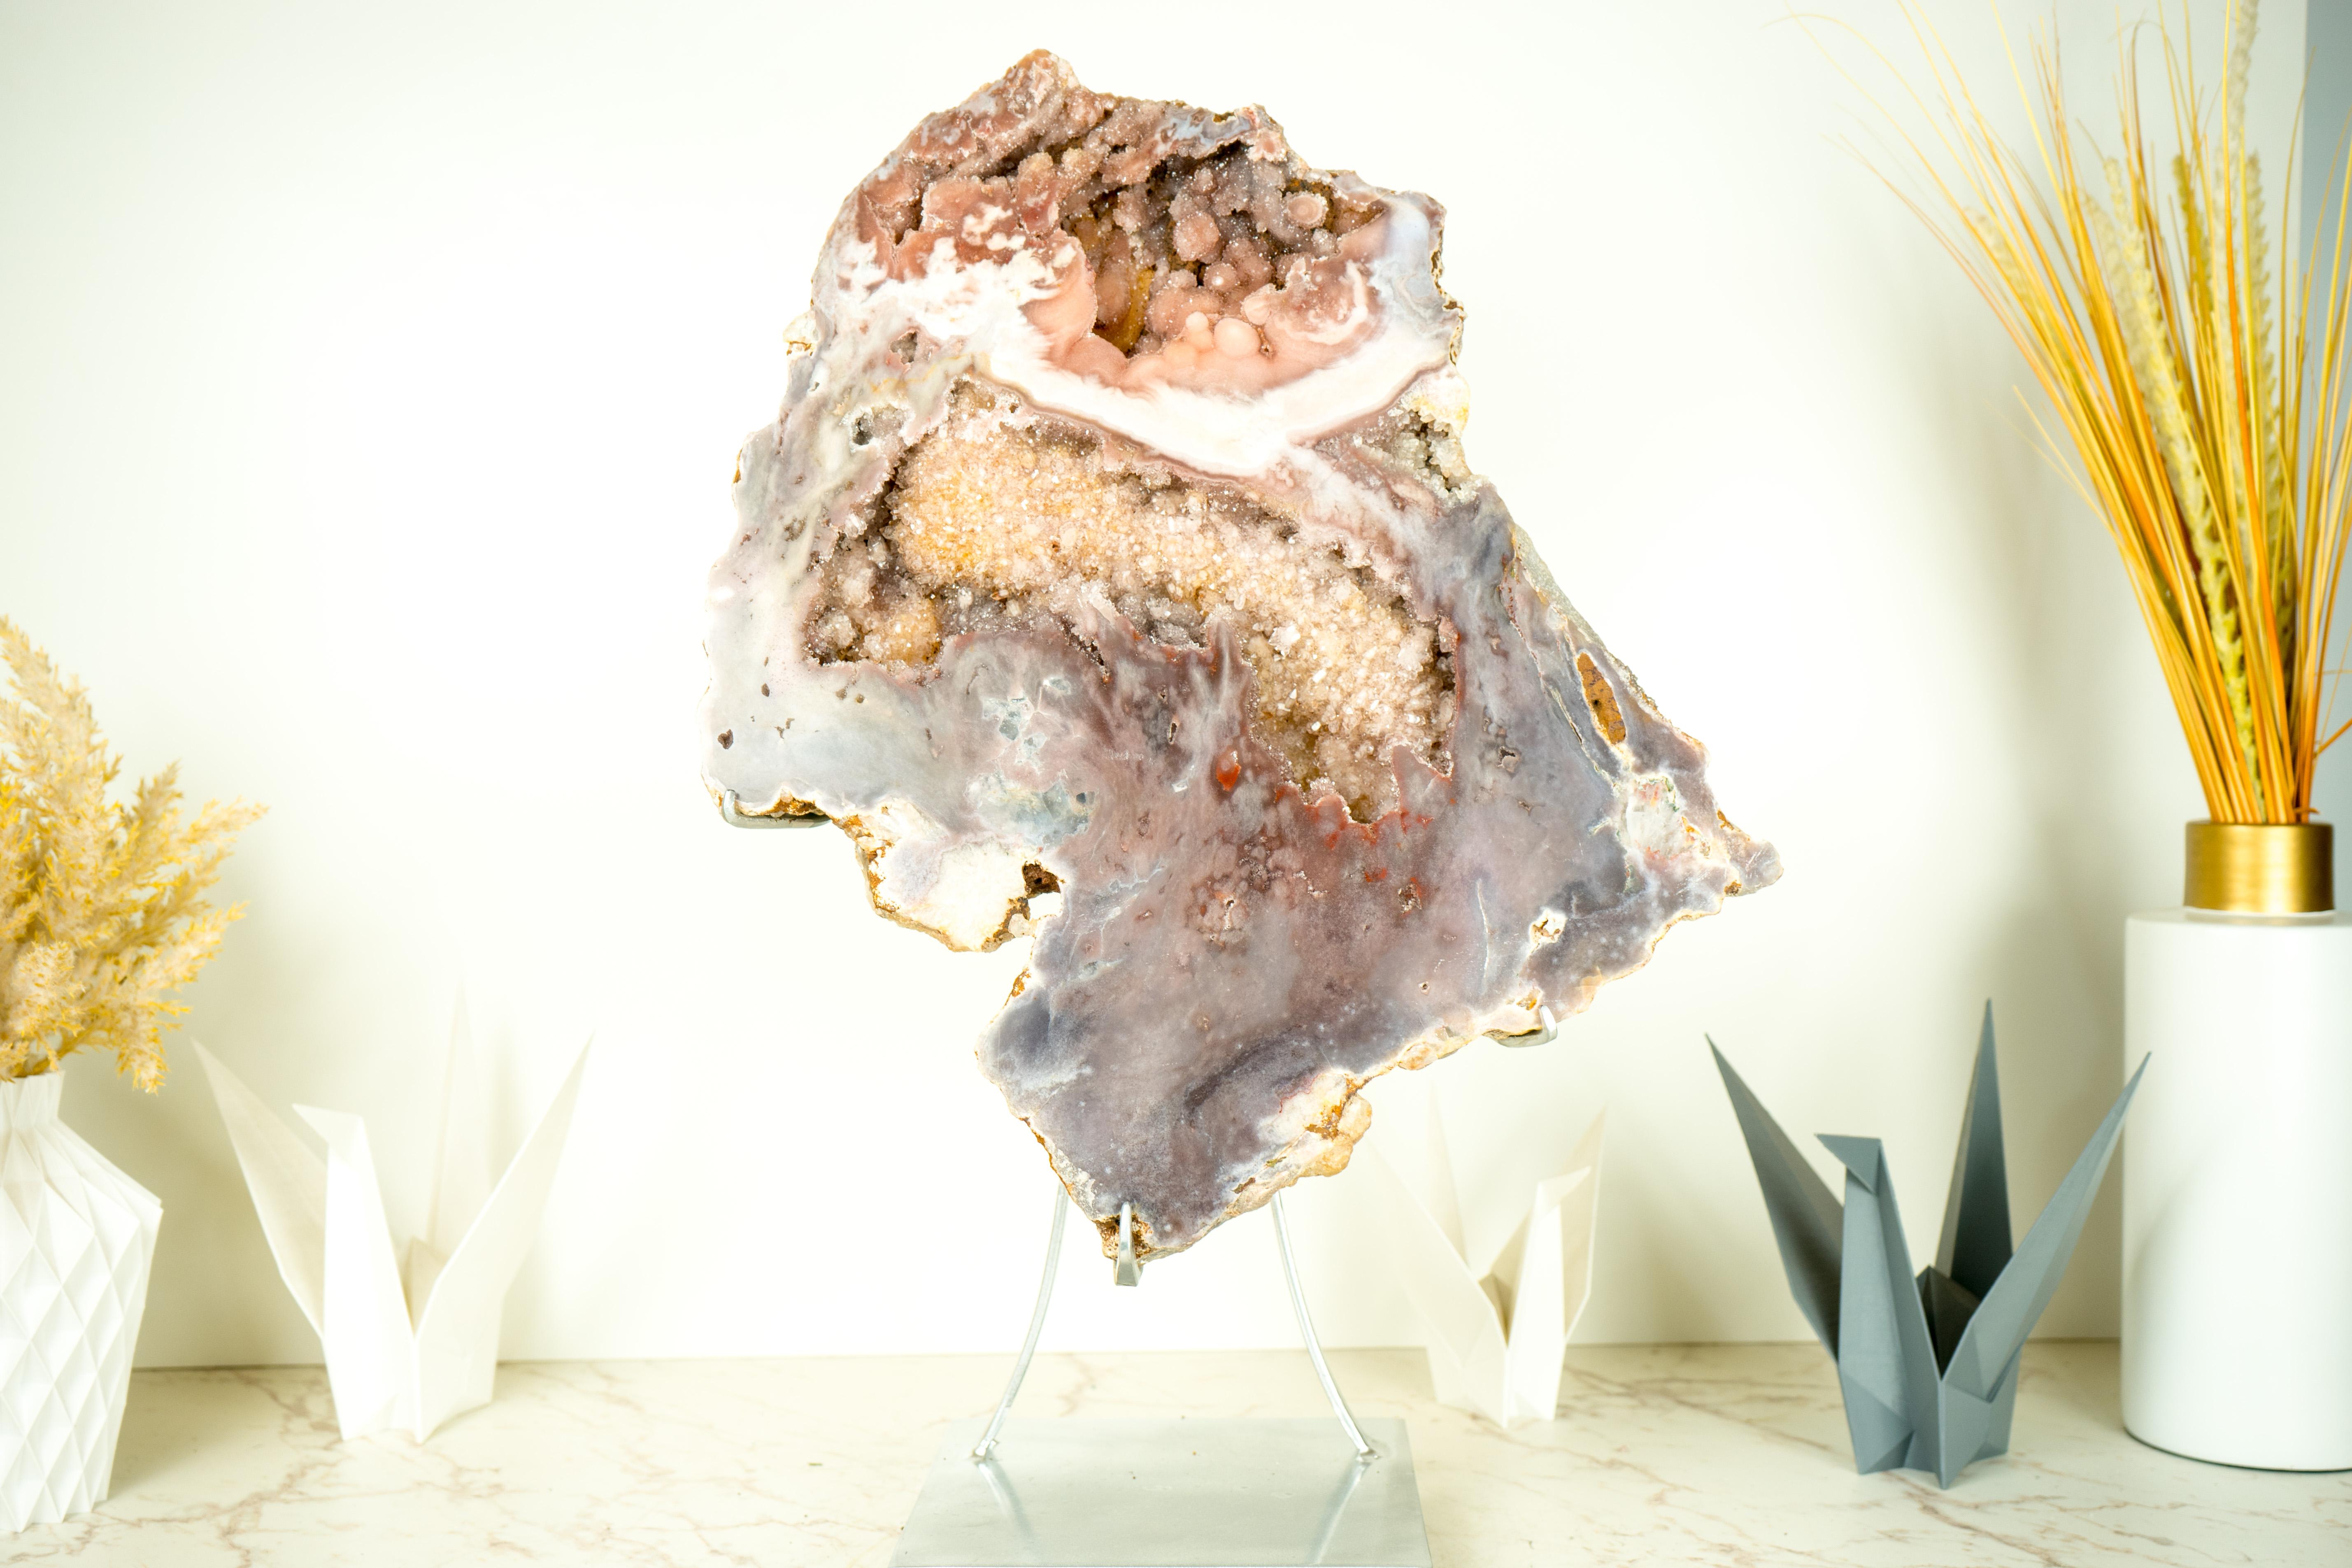 Rare Large Pink Amethyst Geode with Multi Colored Pink, Purple, and Red Druzy and Botroydal Stalactites

▫️ Description

Nature spared no effort when creating this Pink Amethyst, a specimen with spectacular aesthetics, showcasing a symphony of